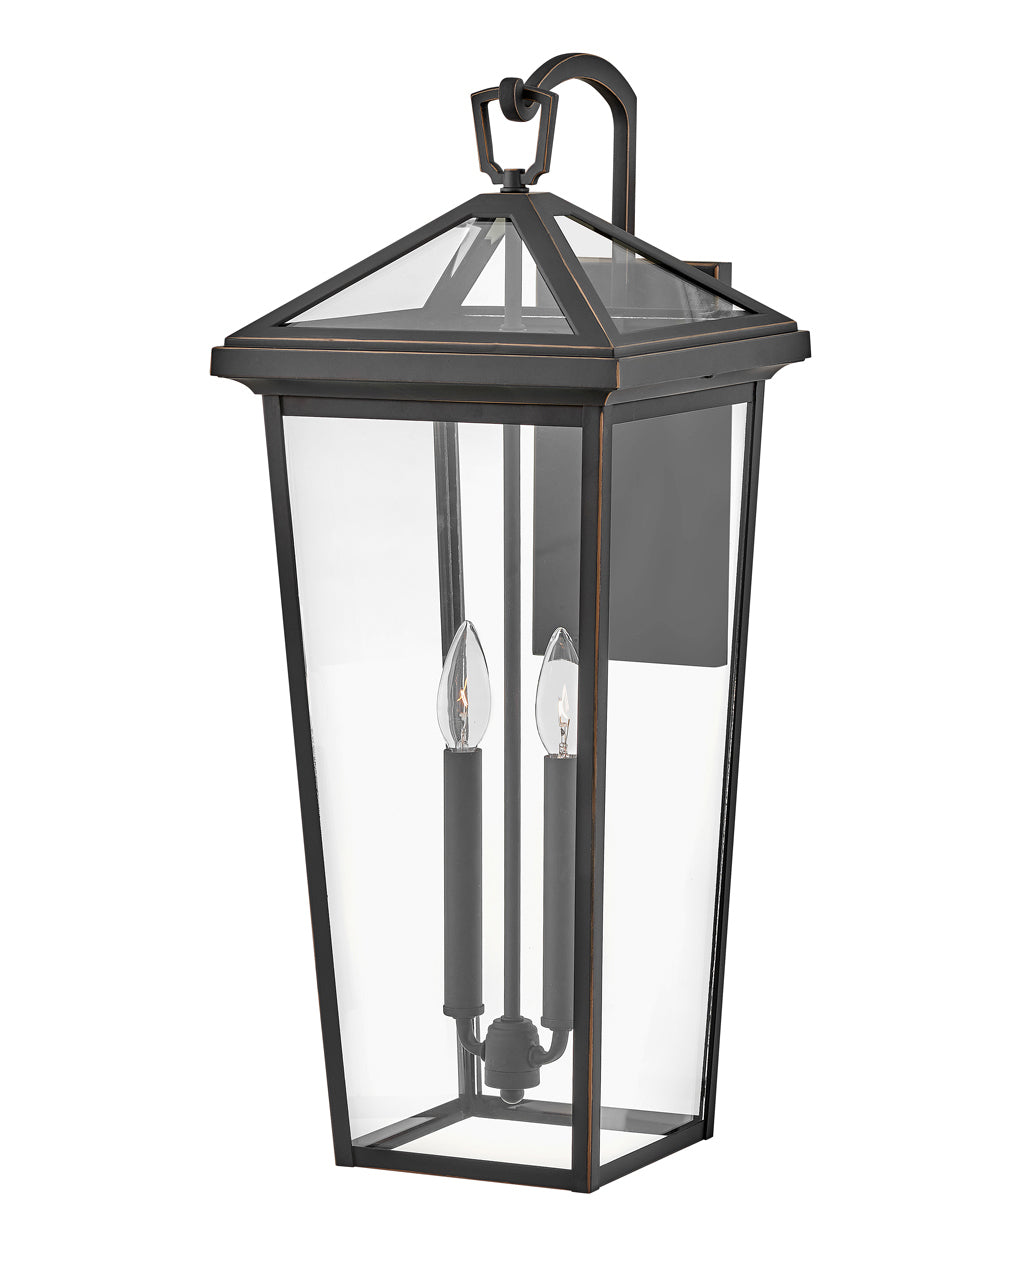 OUTDOOR ALFORD PLACE Wall Mount Lantern Outdoor l Wall Hinkley Oil Rubbed Bronze 11.25x10.0x26.0 